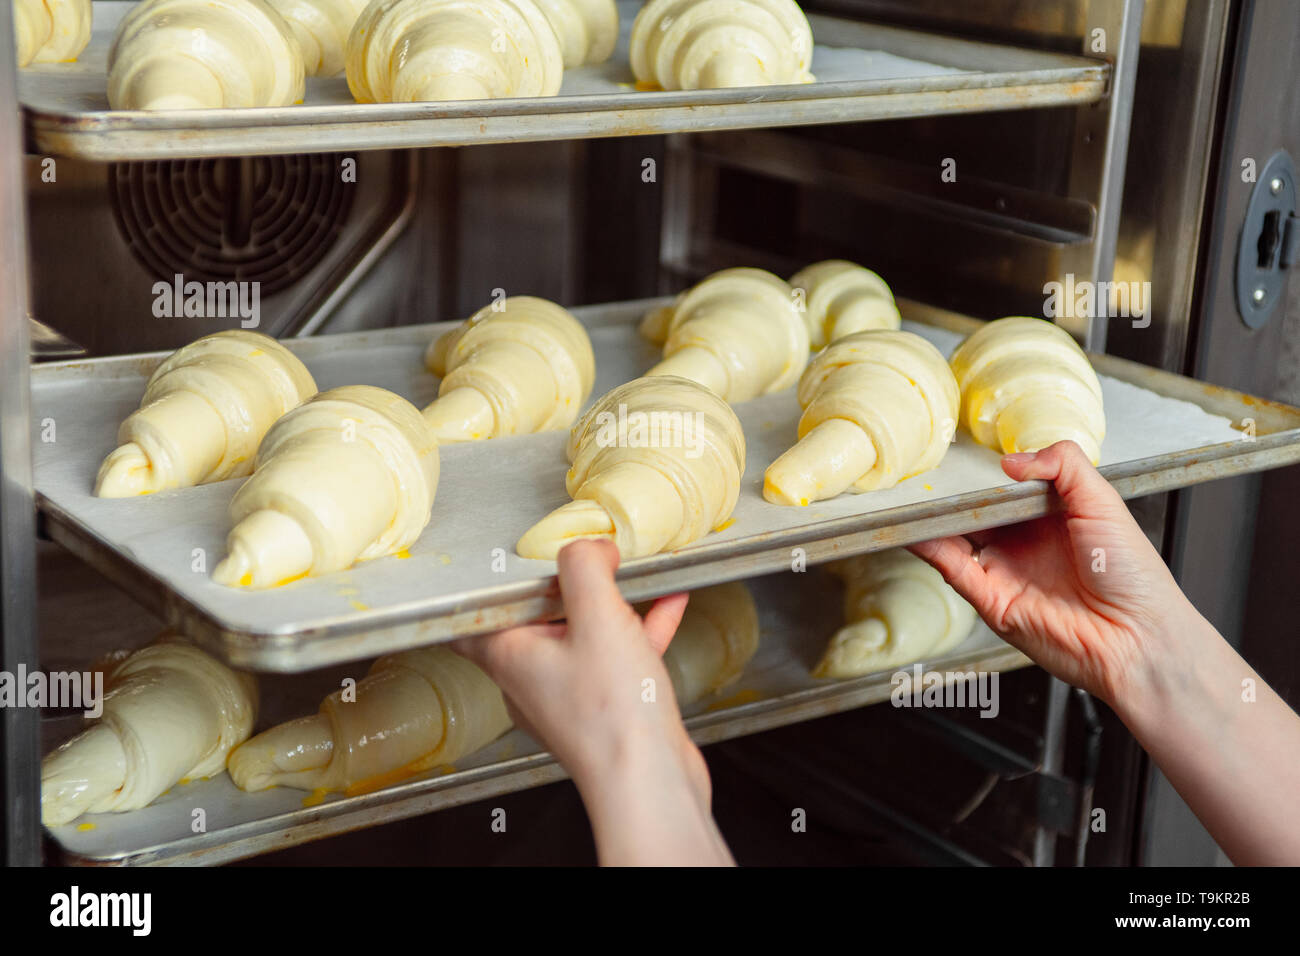 https://c8.alamy.com/comp/T9KR2B/female-hands-put-the-baking-in-the-oven-on-a-sheet-of-metal-the-process-of-making-croissants-T9KR2B.jpg